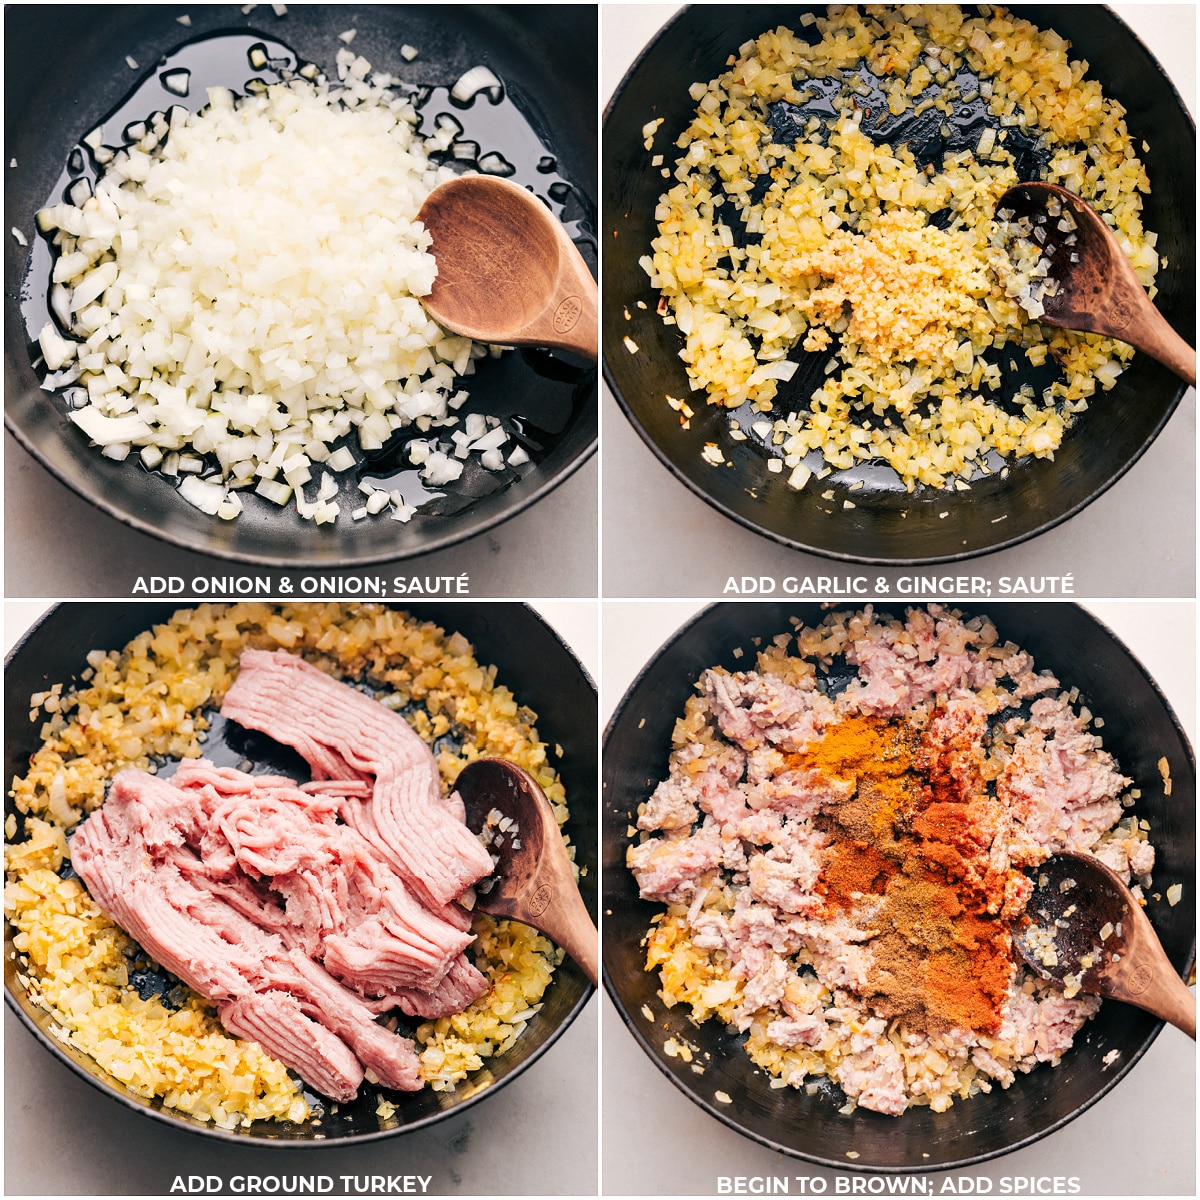 Onions being sautéed in a pan, followed by the addition of garlic and ginger, then the ground turkey is added, and once it begins to brown, the spices are incorporated, illustrating the cooking for the Indian Ground Turkey Bowls recipe.